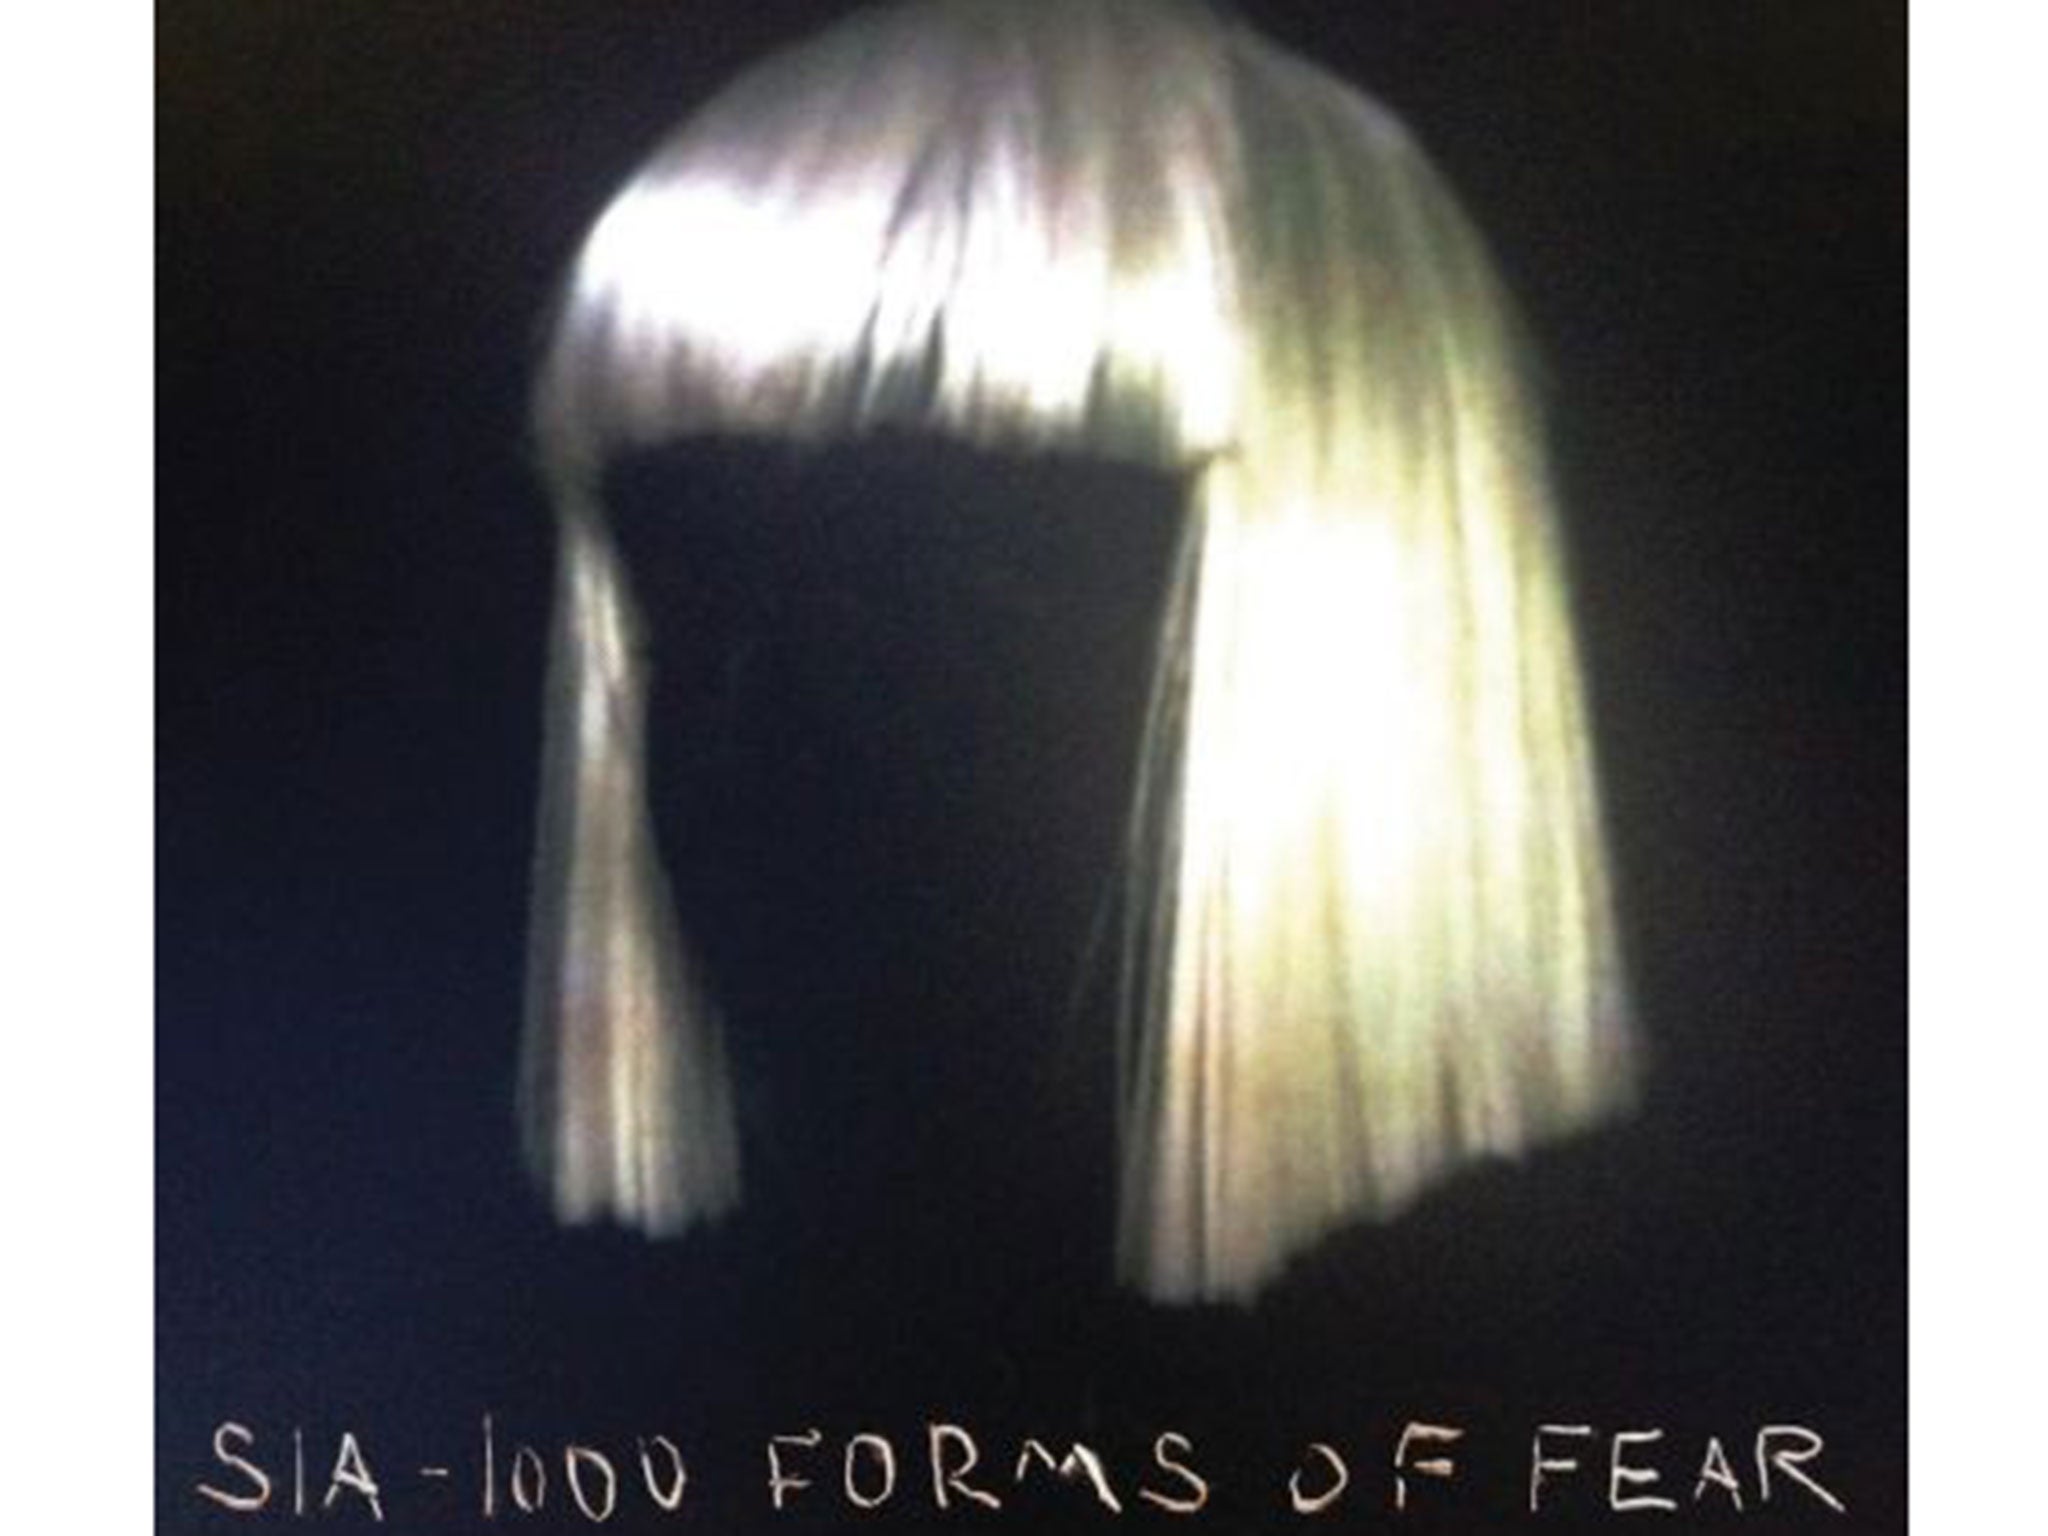 Sia 1000 forms of Fear